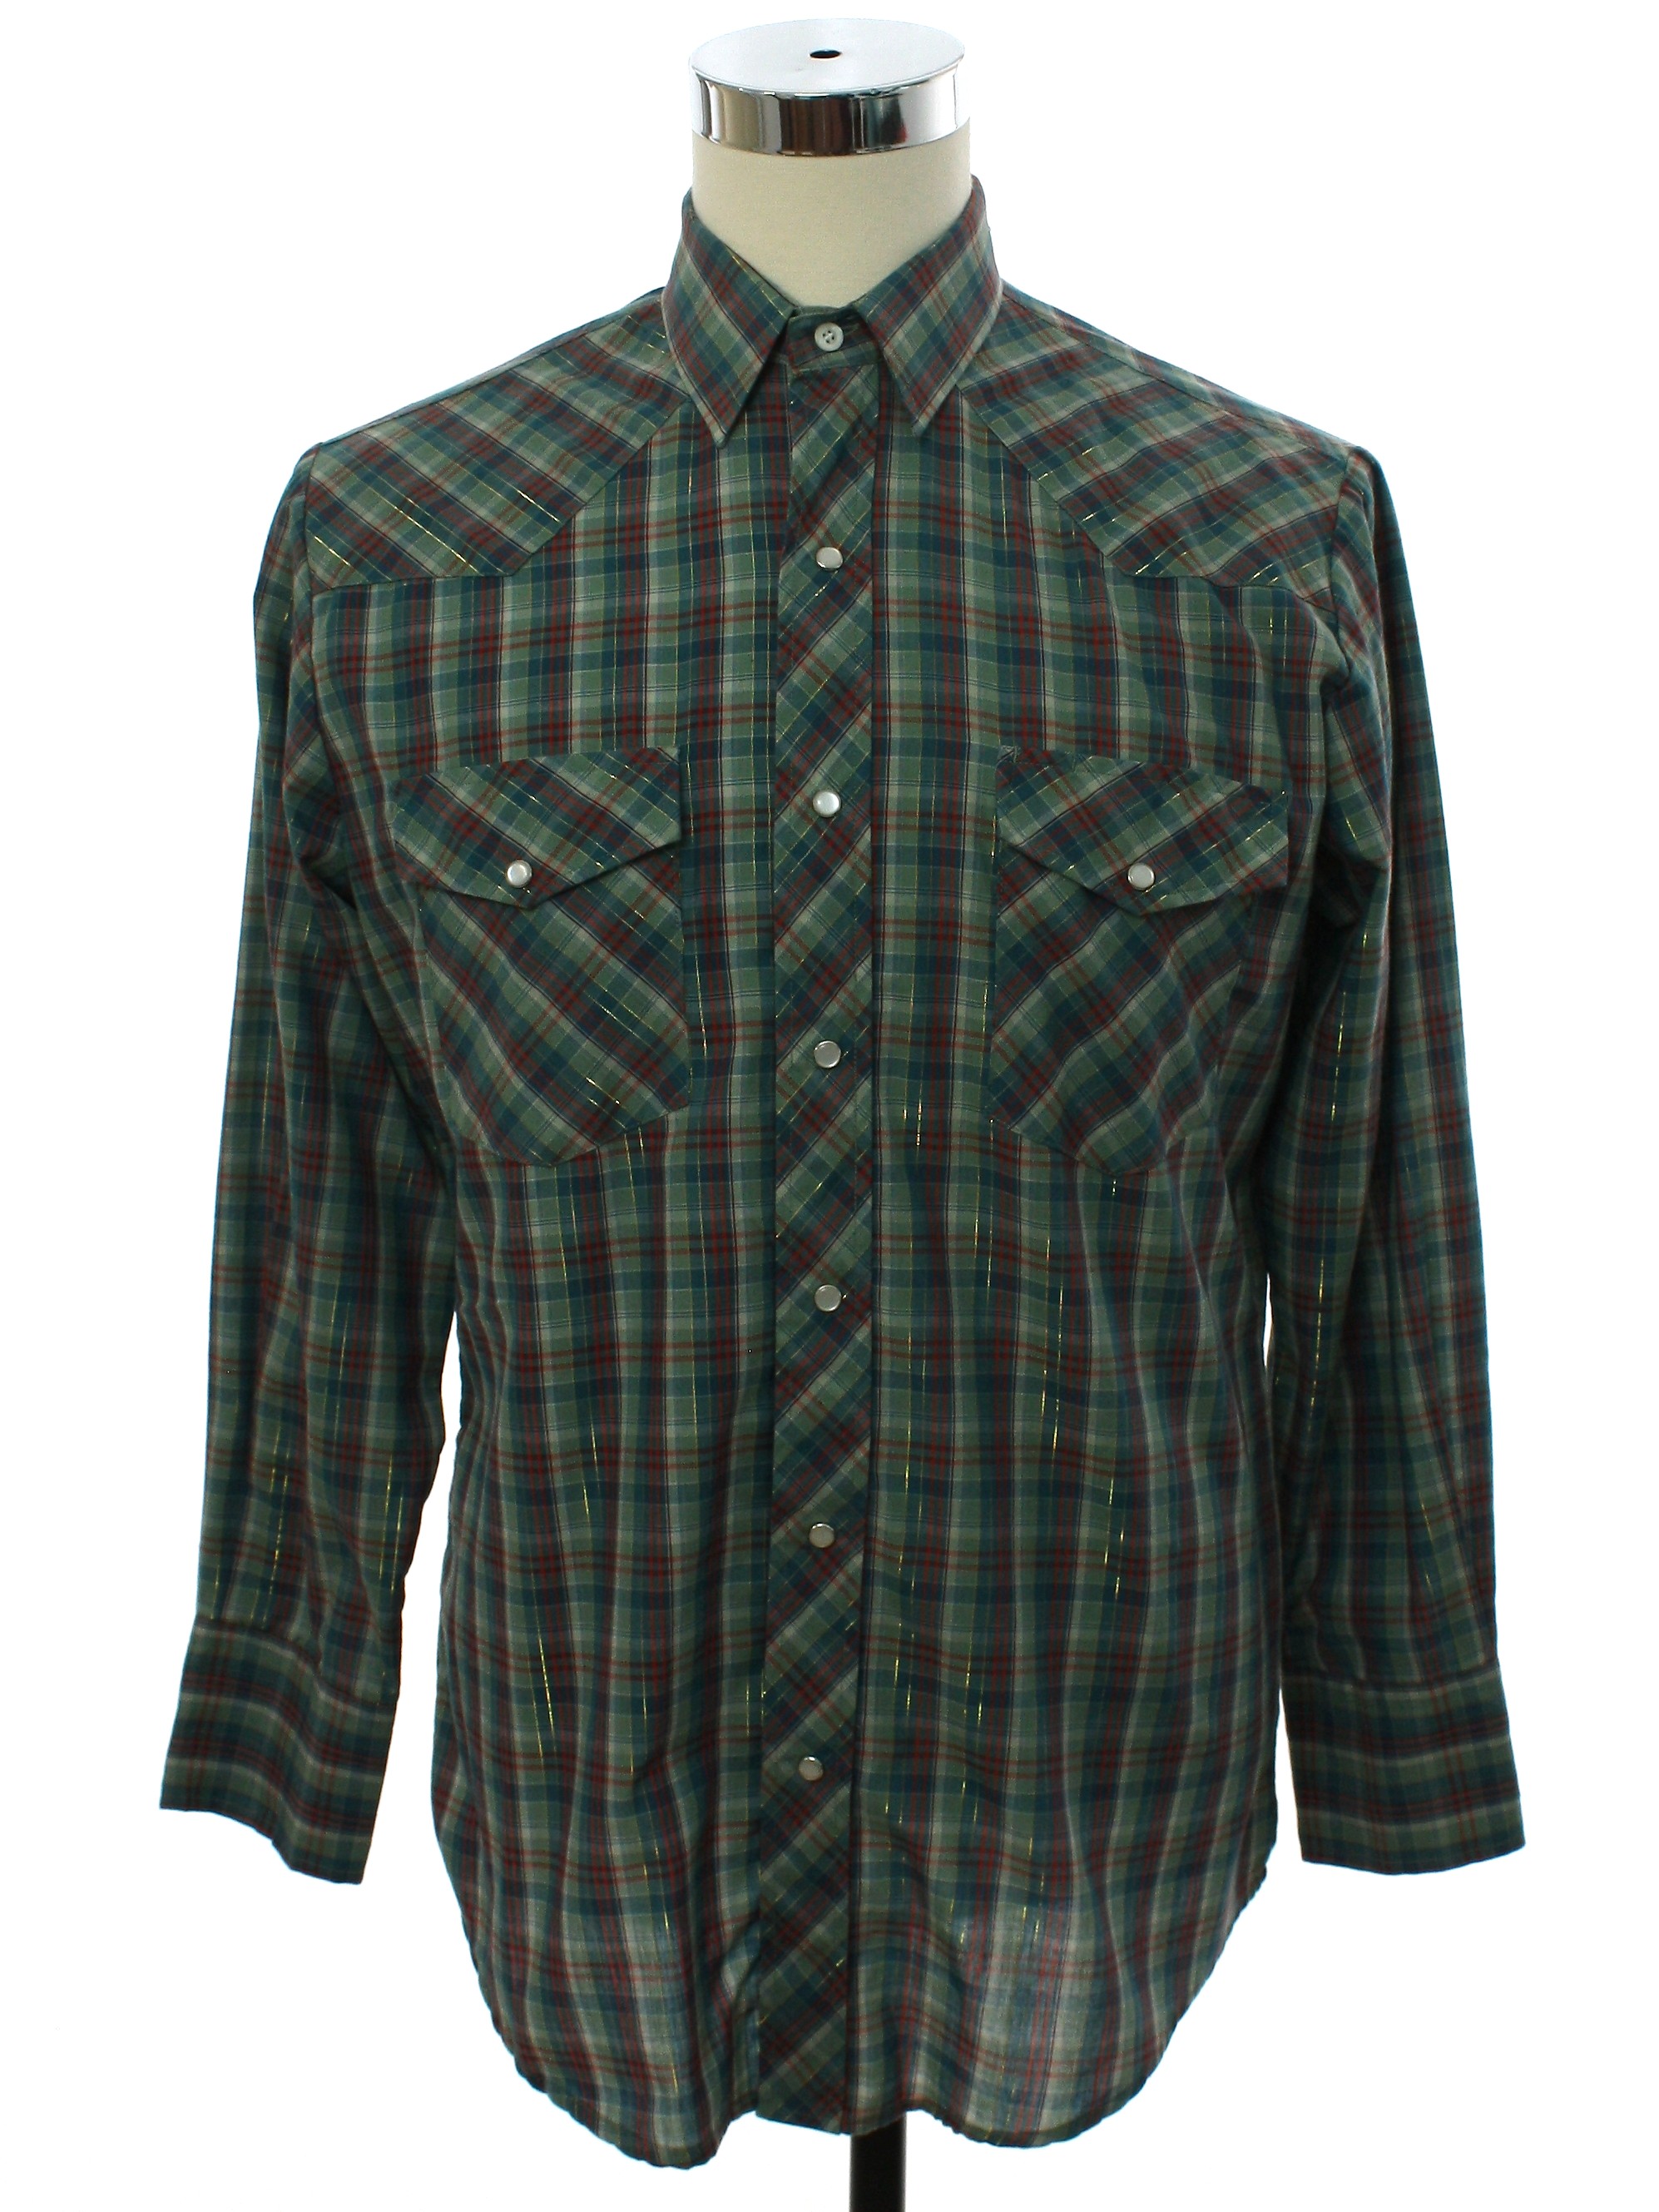 Western Shirt: 90s -Roper- Mens shades of green, teal, and gold lurex ...